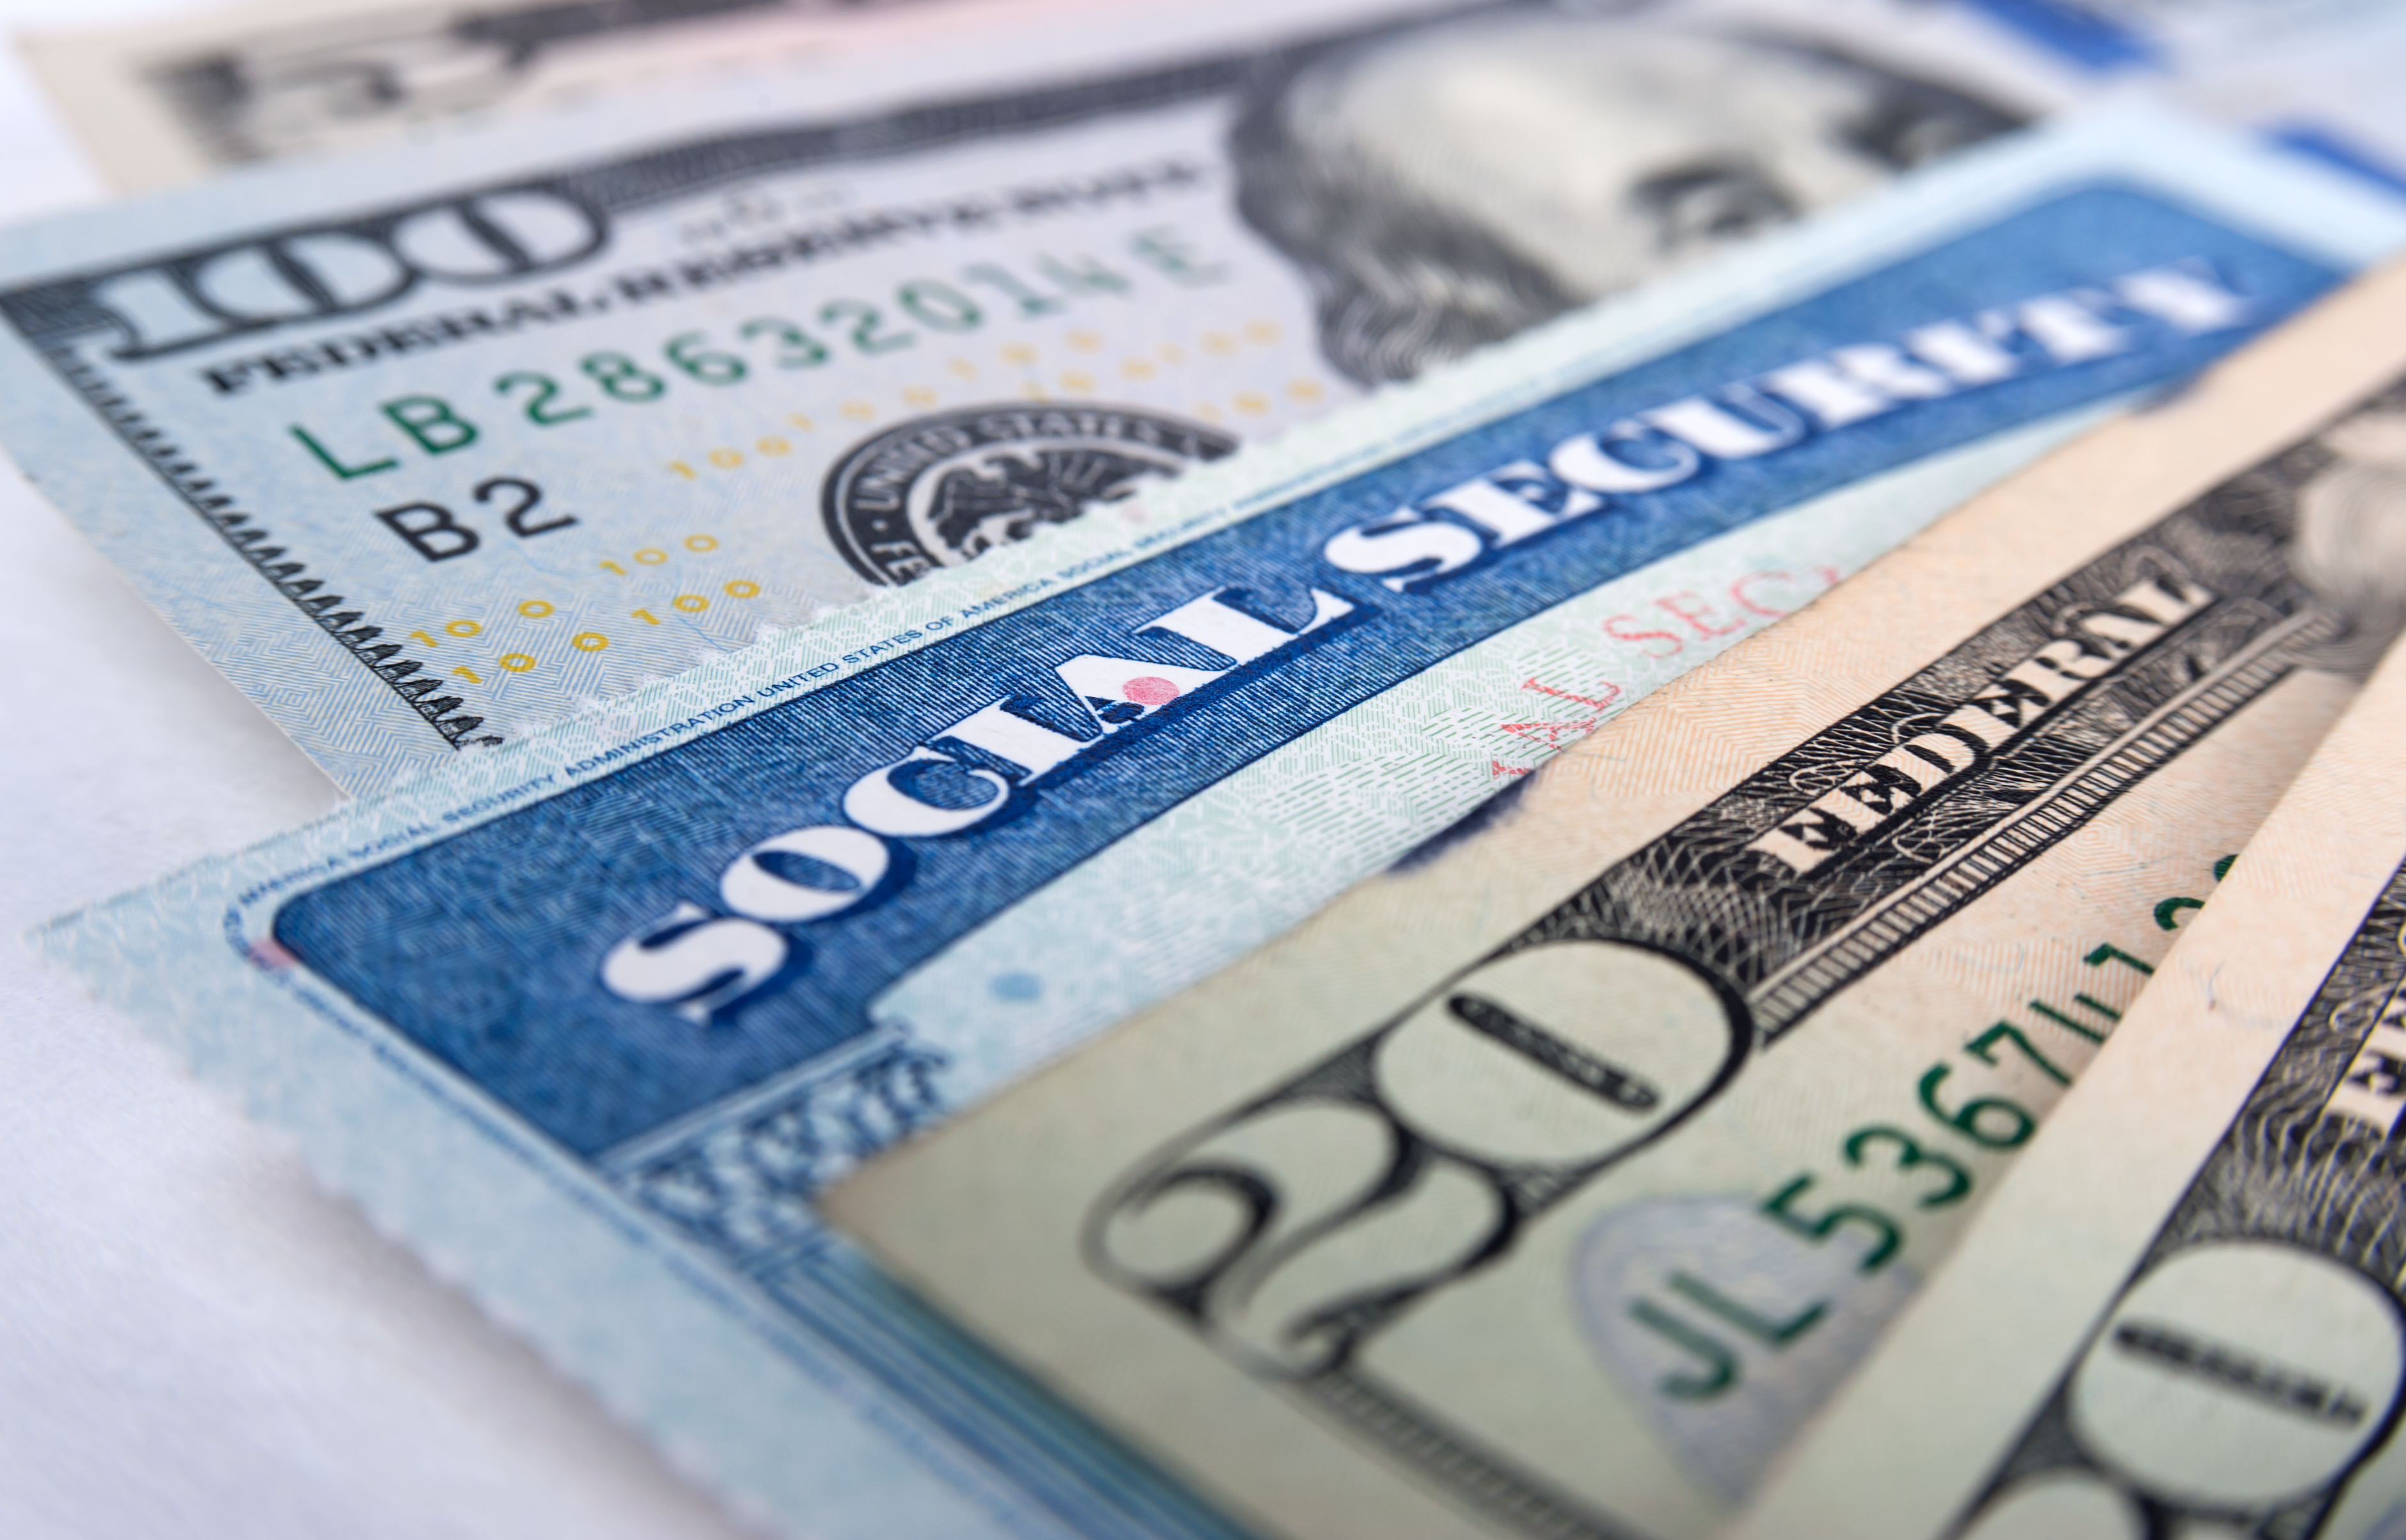 Social Security Mistakes Can Cost You Tens of Thousands of Dollars. Here's How to Get Good Advice